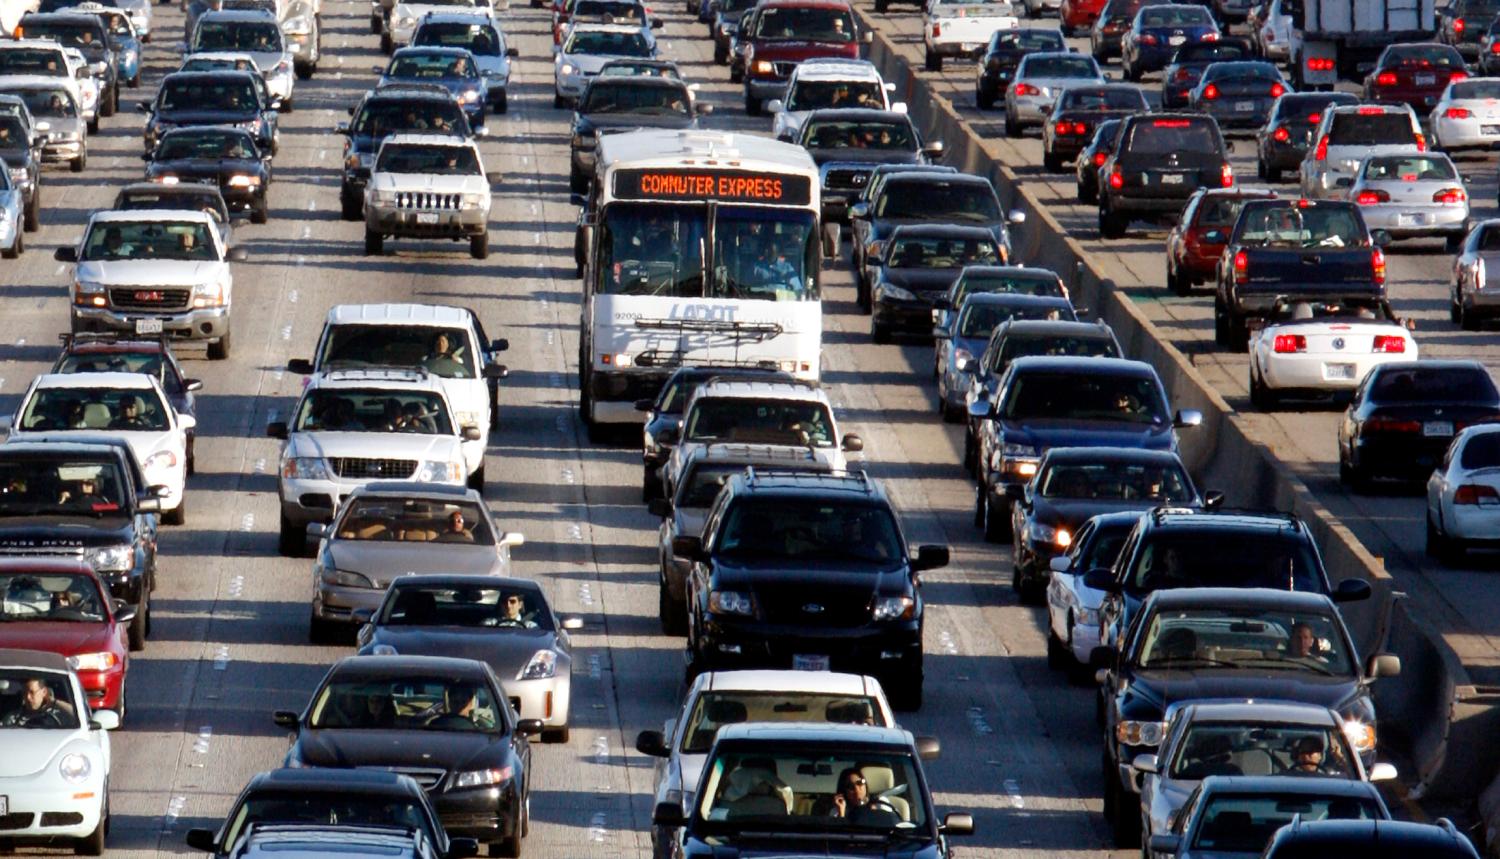 Vehicles are seen during rush hour on the 405 freeway in Los Angeles, California October 3, 2007. REUTERS/Lucy Nicholson (UNITED STATES) - RTR1UK7P